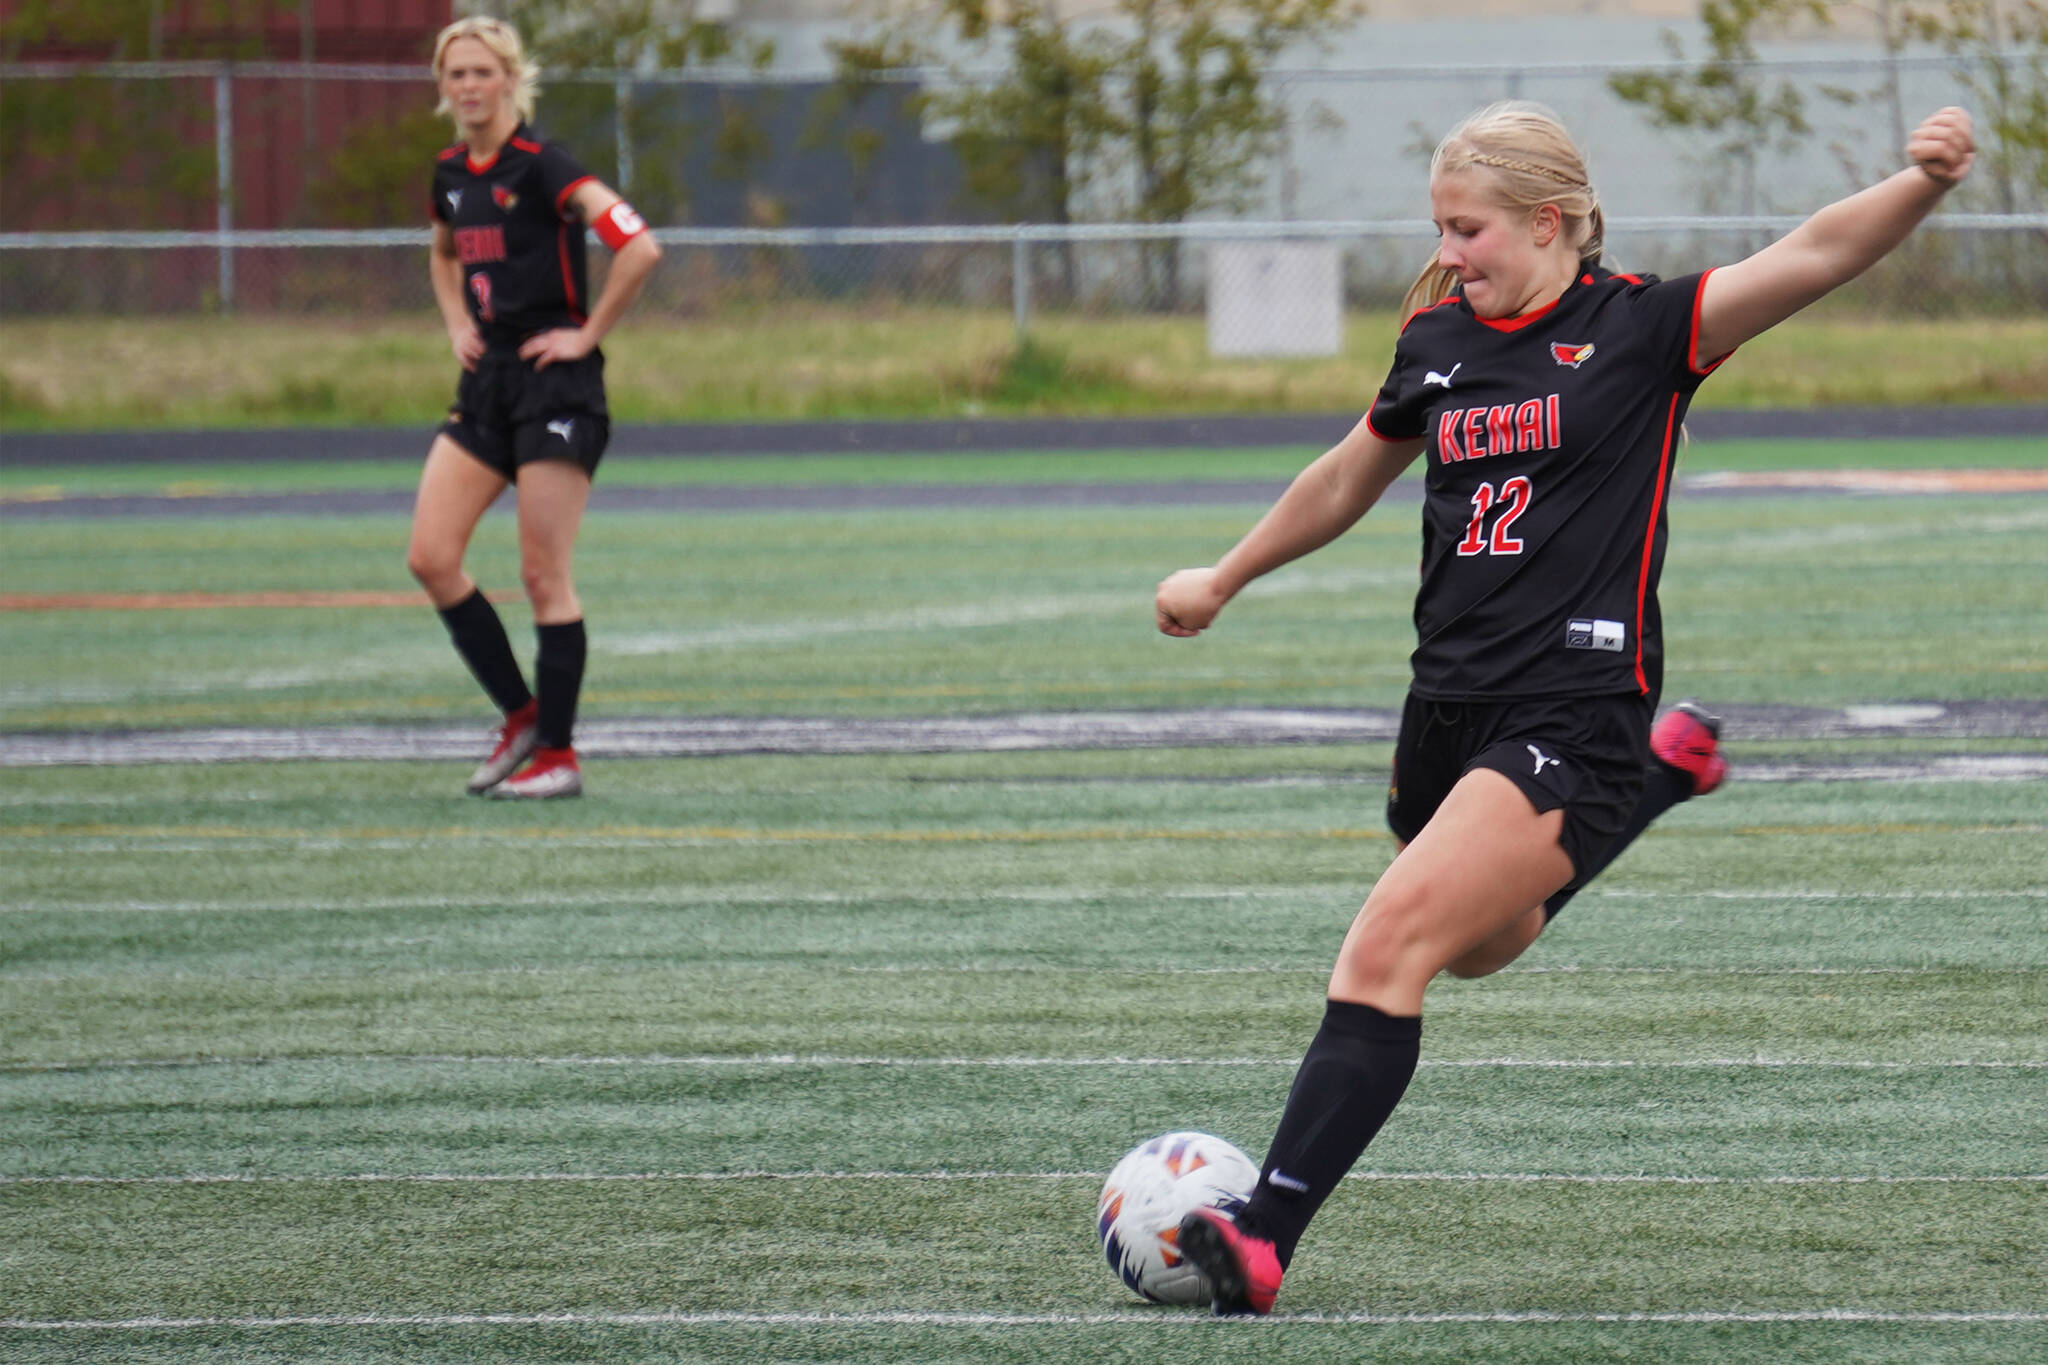 Kenai Central’s Kate Wisnewski prepares for a big kick during the Division II Soccer State Championship on Saturday, May 27, 2023, at West Anchorage High School in Anchorage, Alaska. (Jake Dye/Peninsula Clarion)